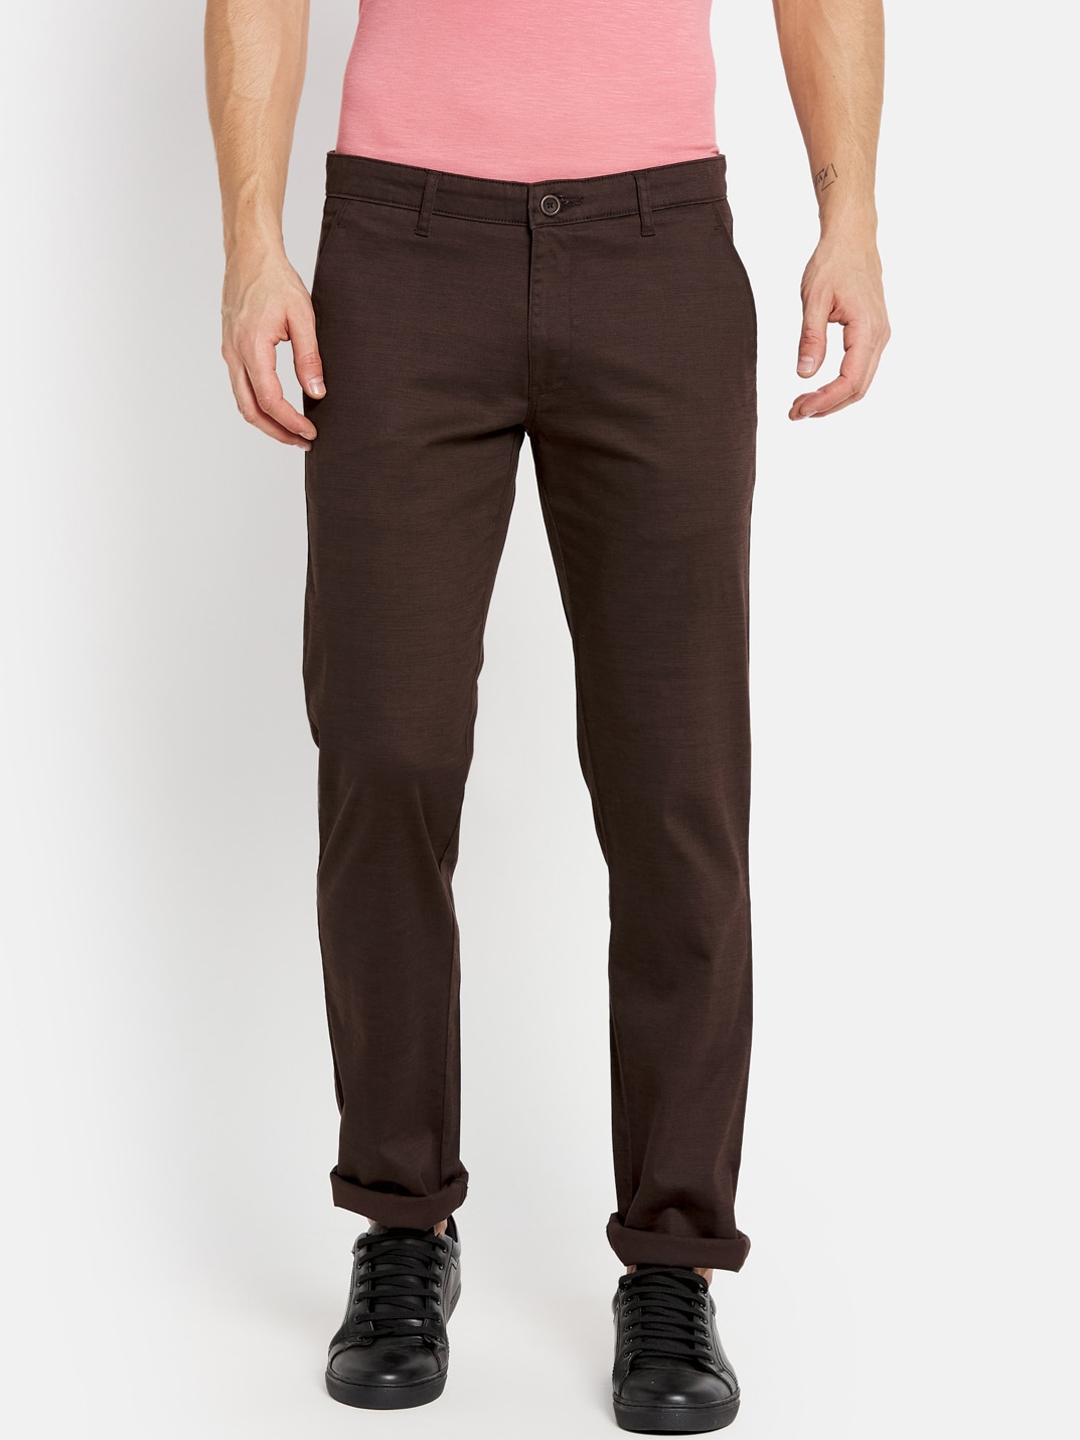 Buy Octave Men Brown Textured Trousers - Trousers for Men 17852408 | Myntra